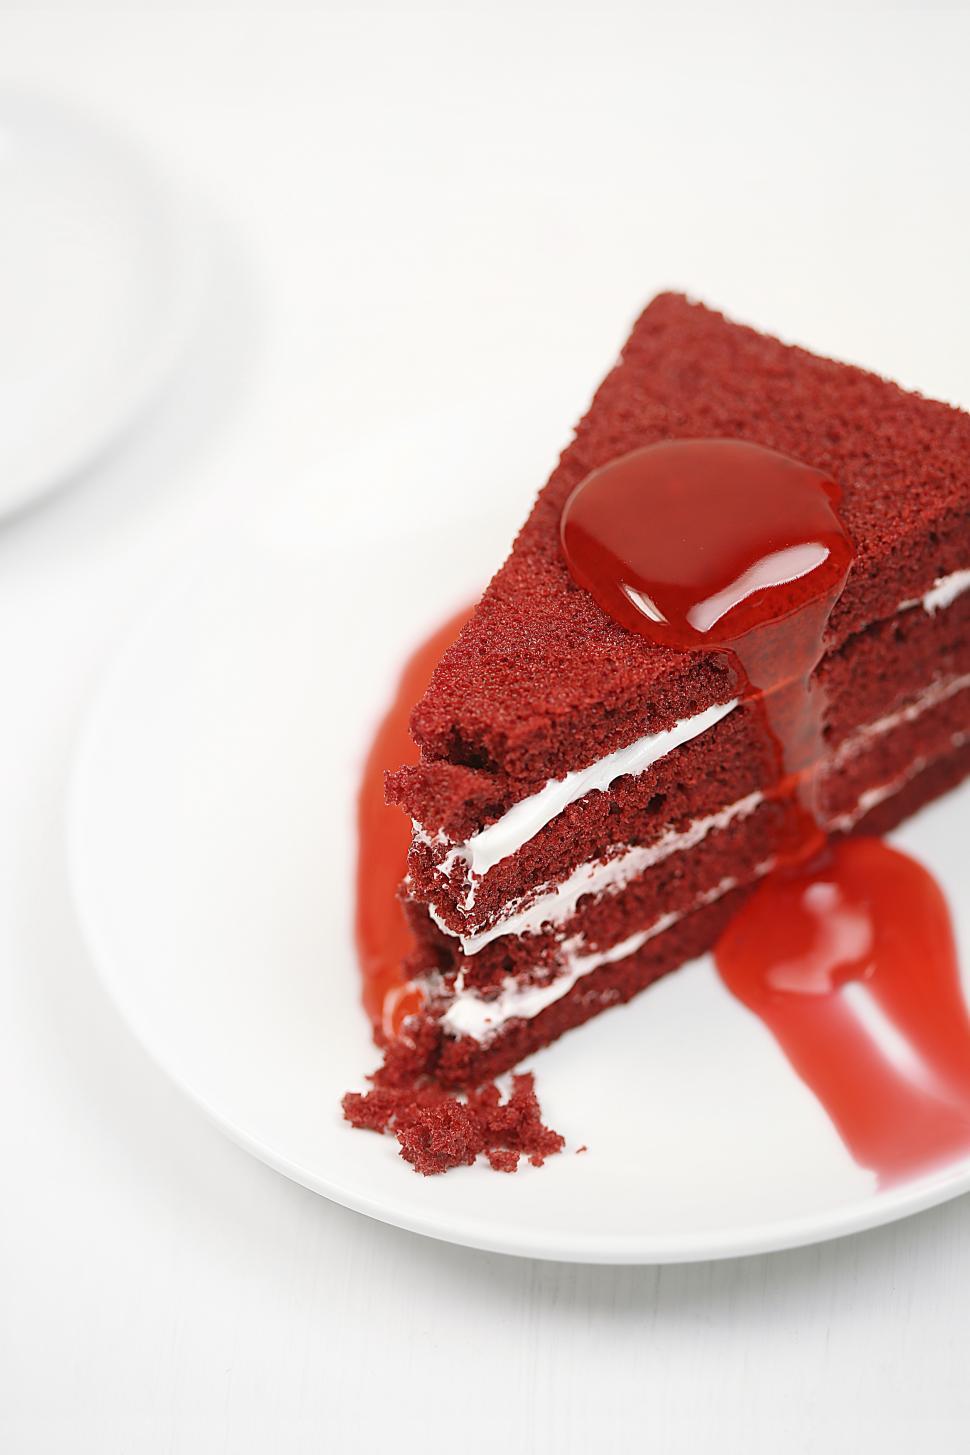 Free Image of Close-up of Red Velvet sponge cake slice with cream on top 